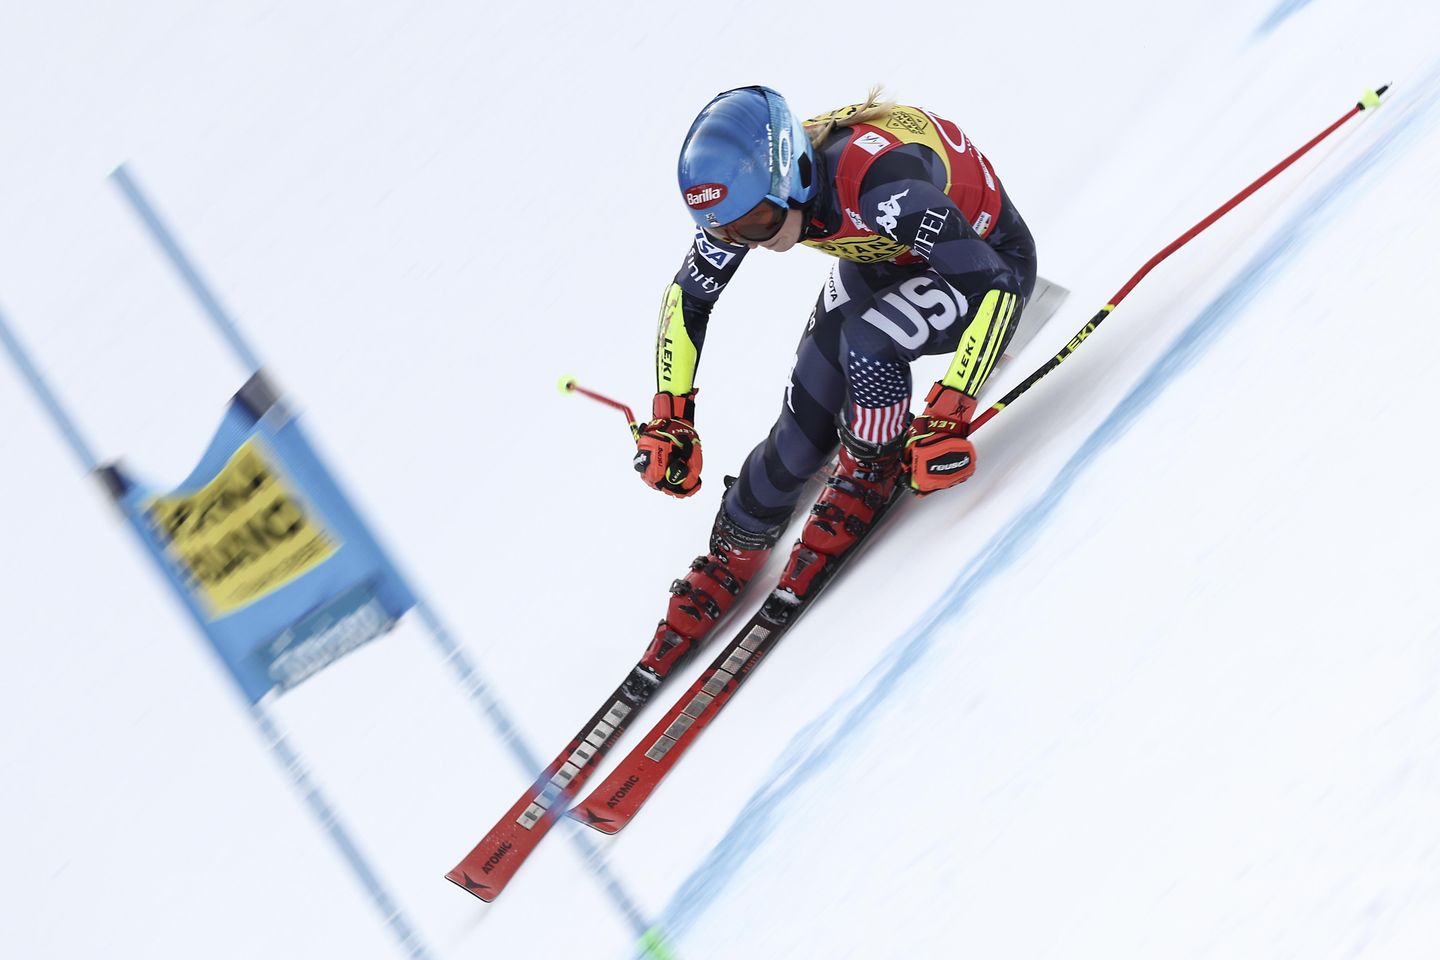 U.S. skier Mikaela Shiffrin adds to record total with 84th win in another World Cup race